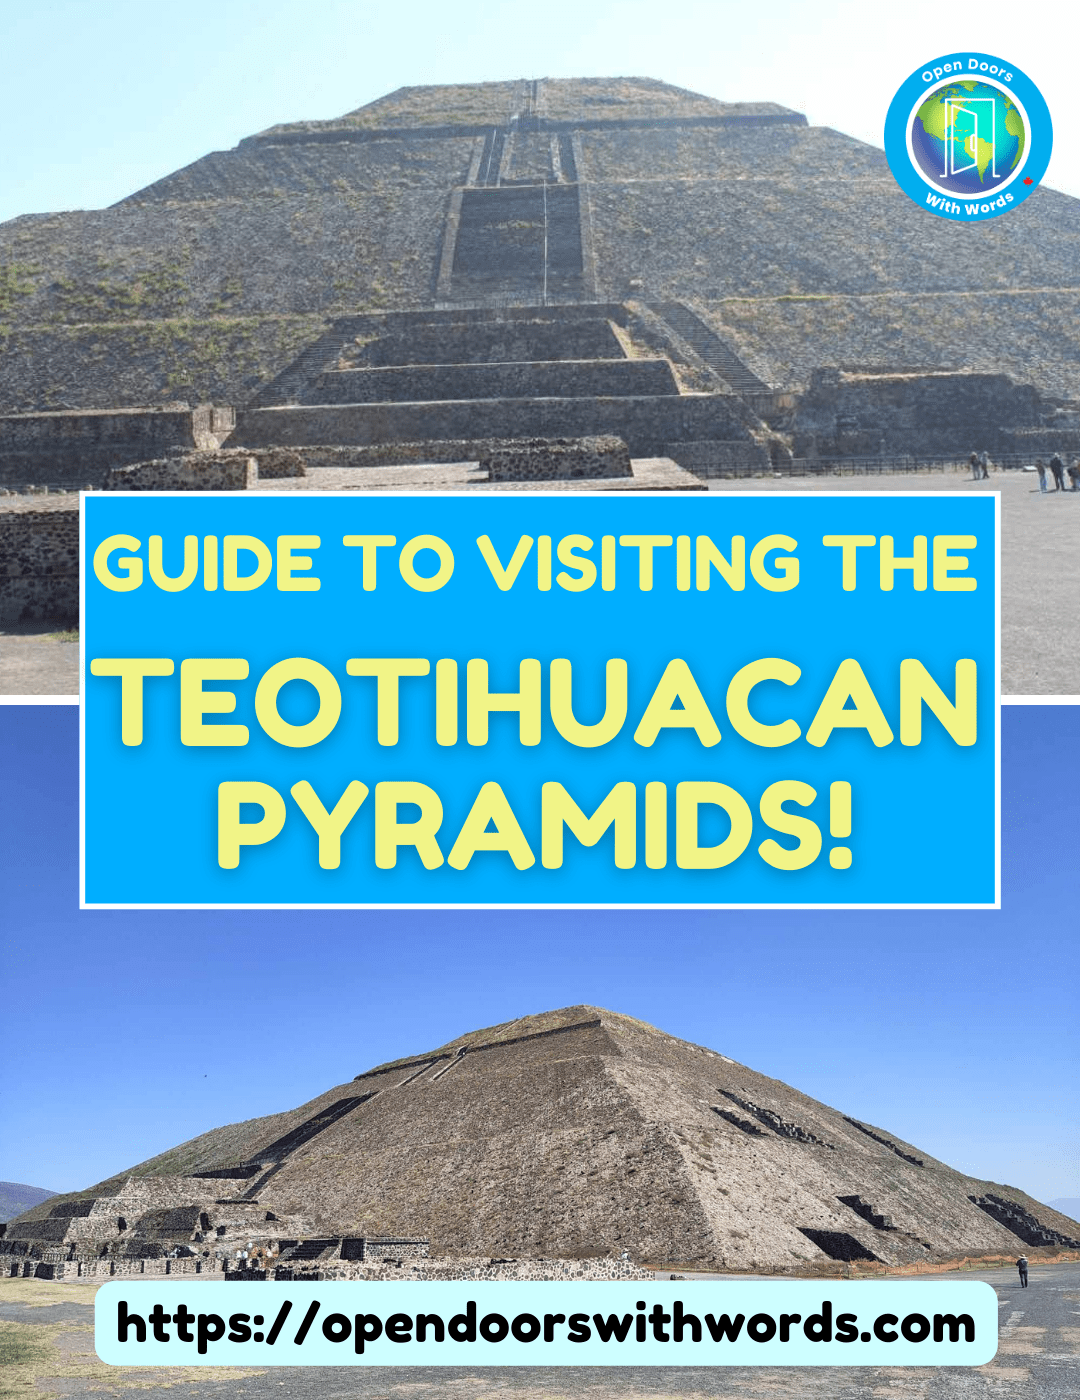 Guide to Visiting the Teotihuacan Pyramids